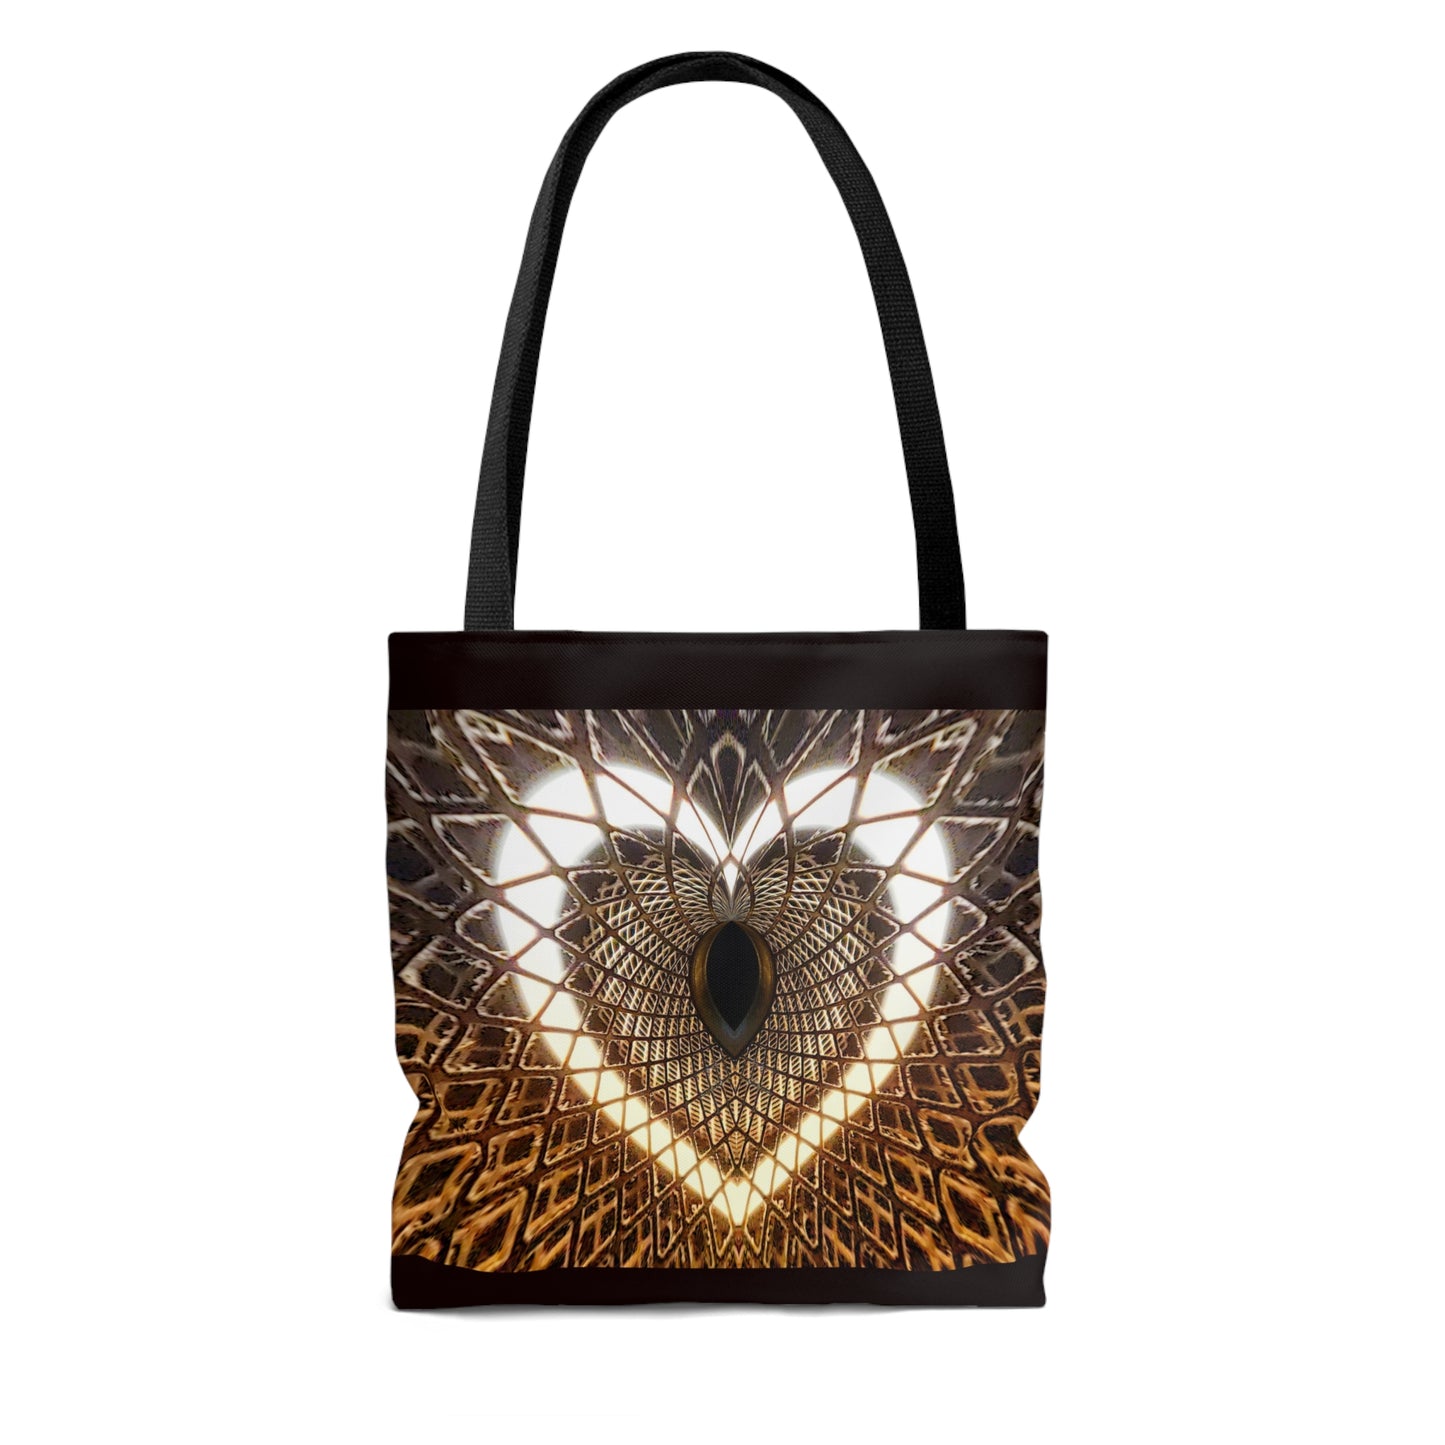 "This Old Dusty Heart of Mine" Panache Tote Bag